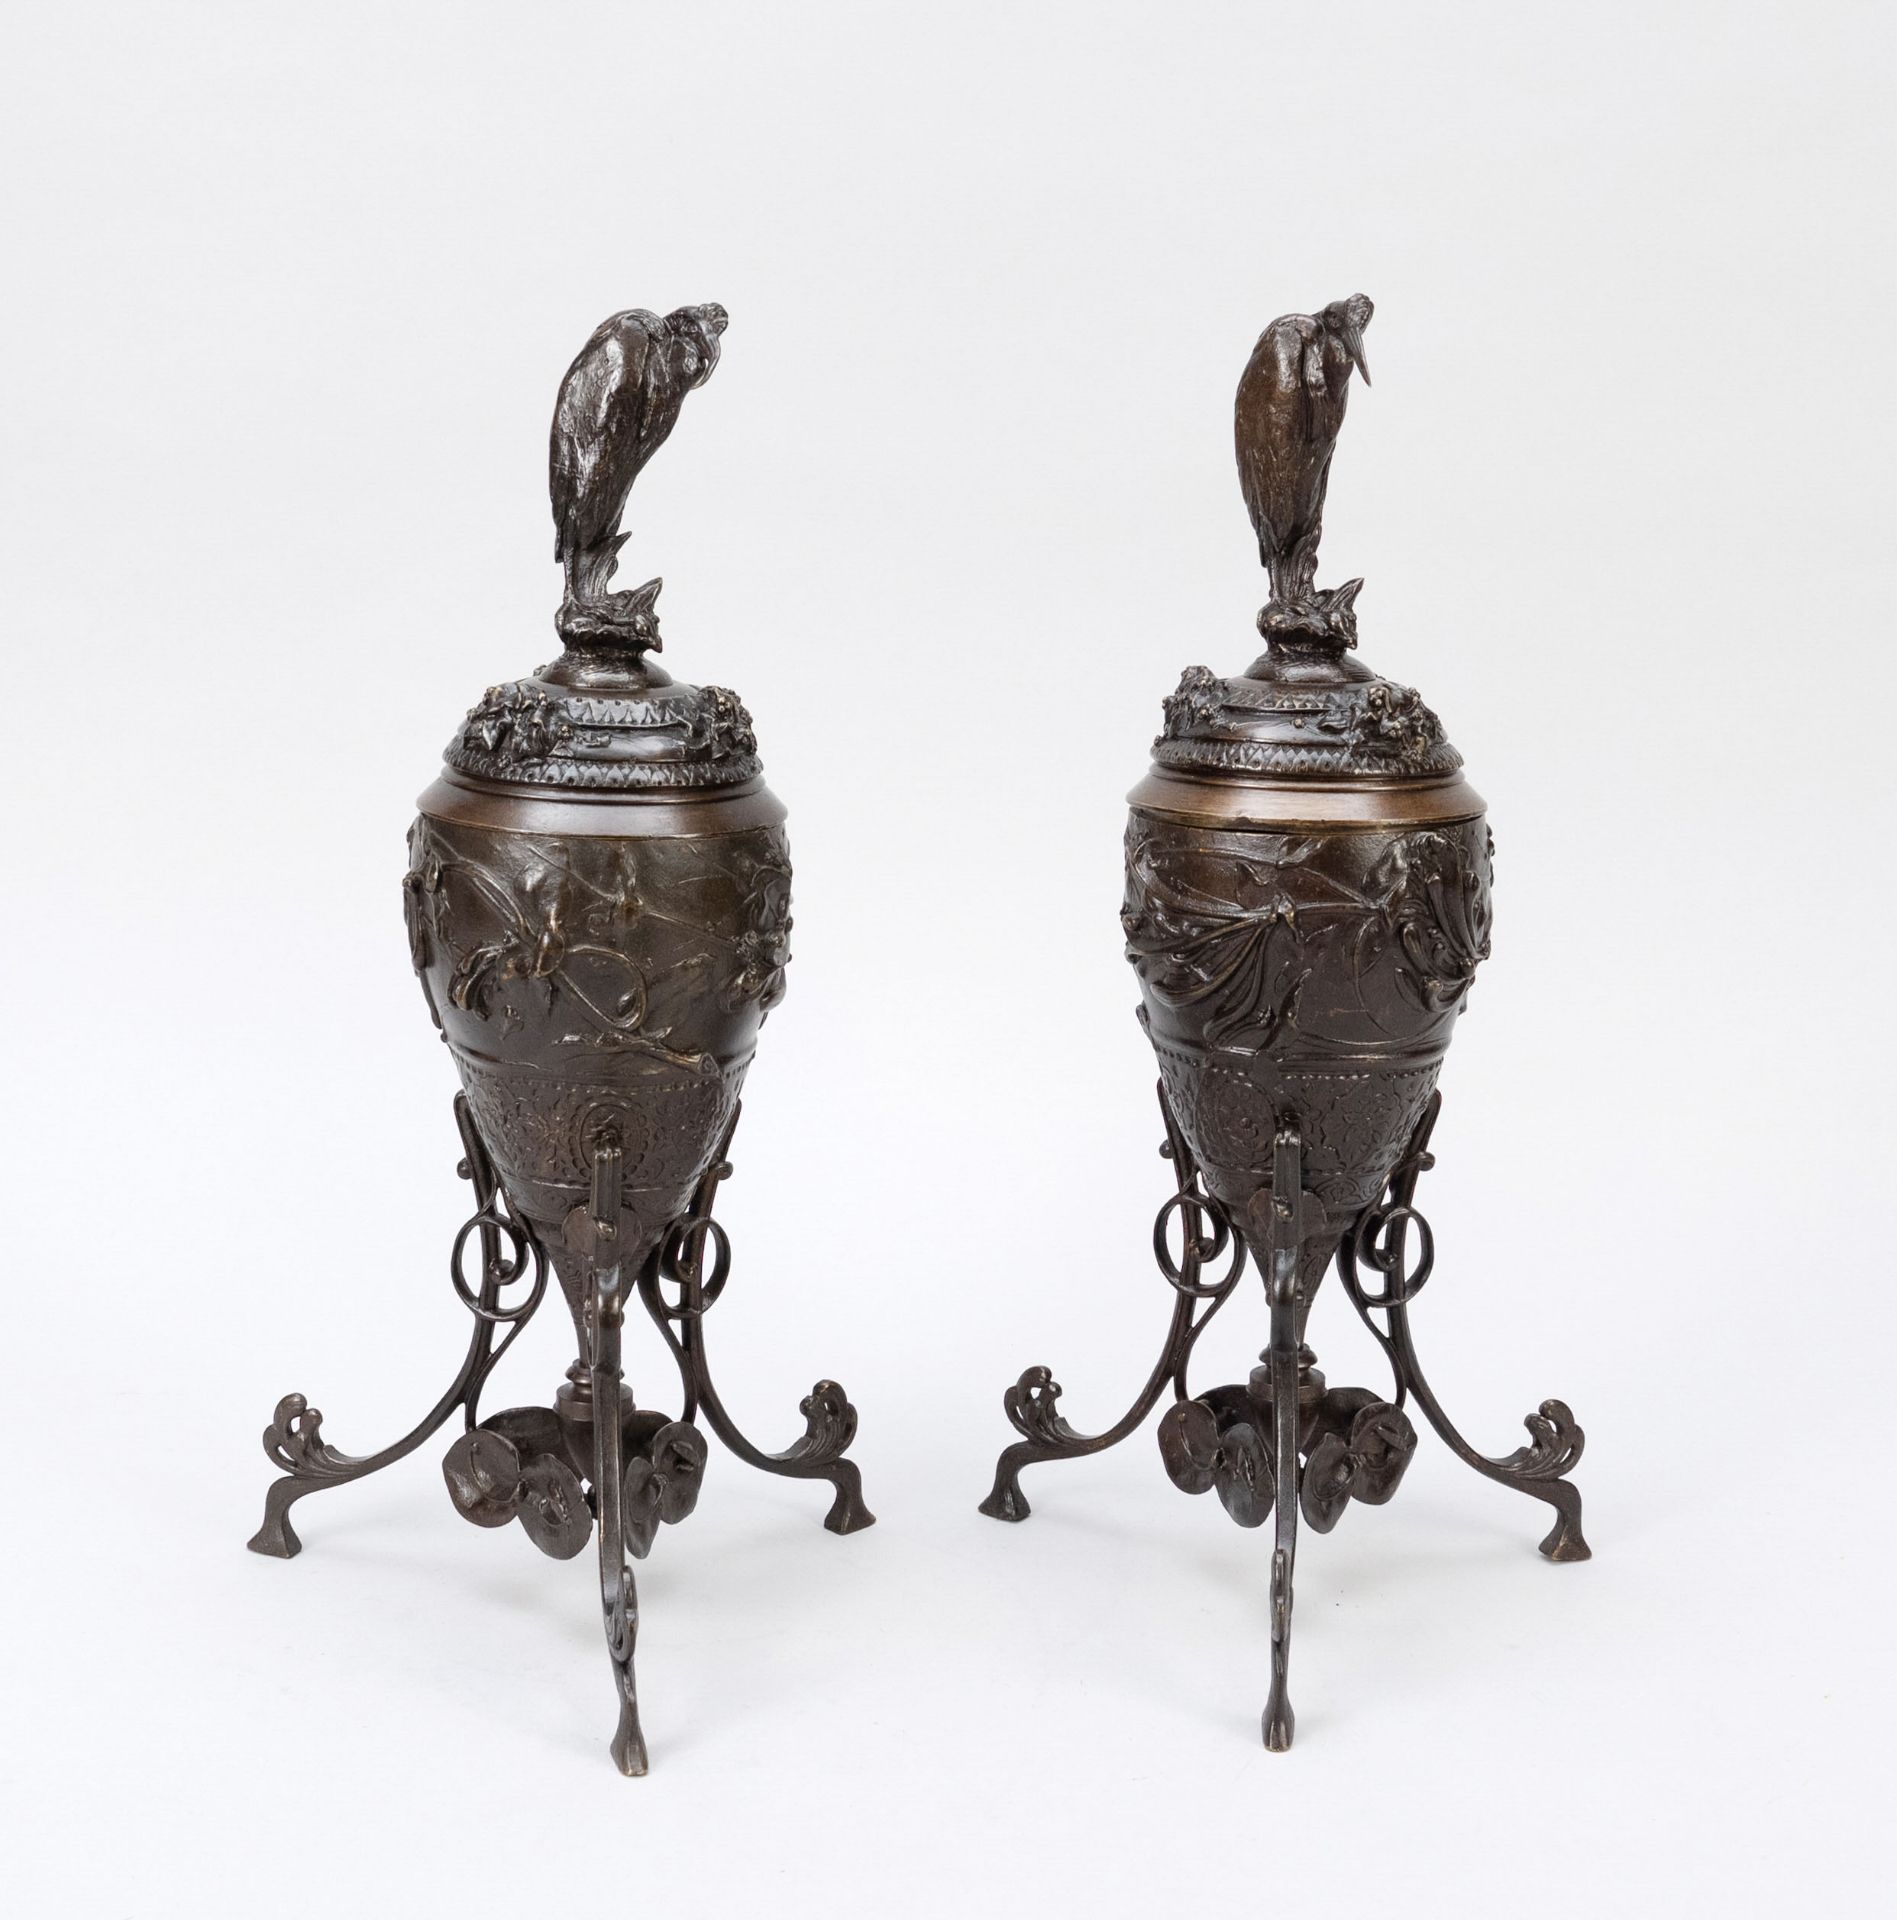 Pair of lidded vessels, 19th c., dark patinated bronze. Trefoil stand as stylized leaf tendril,